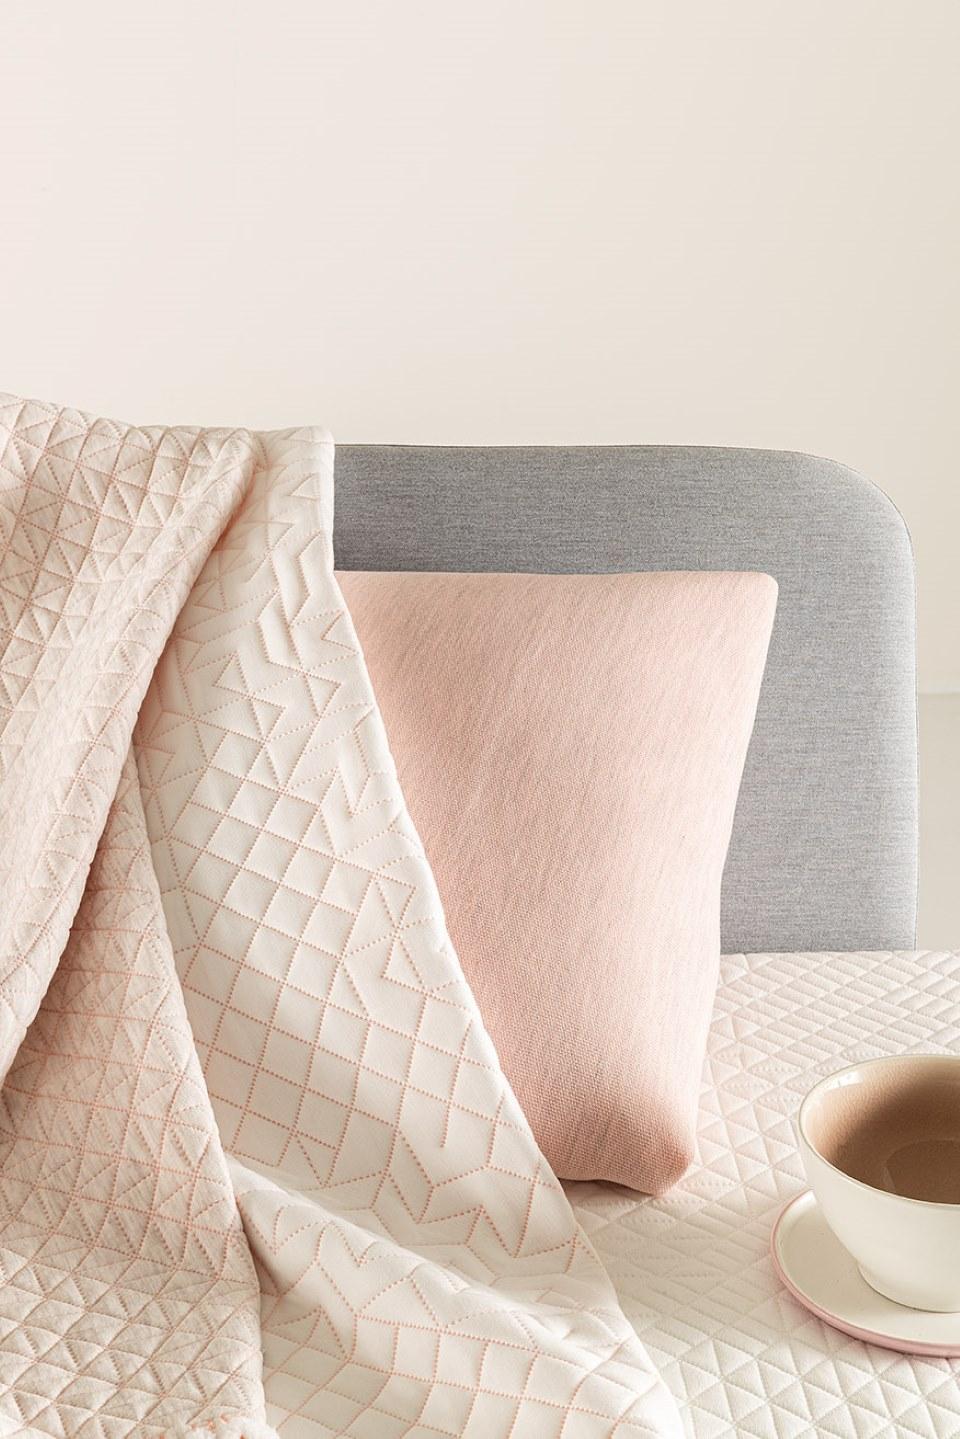 mattress and pillow fabrics in grey, pink and white colors